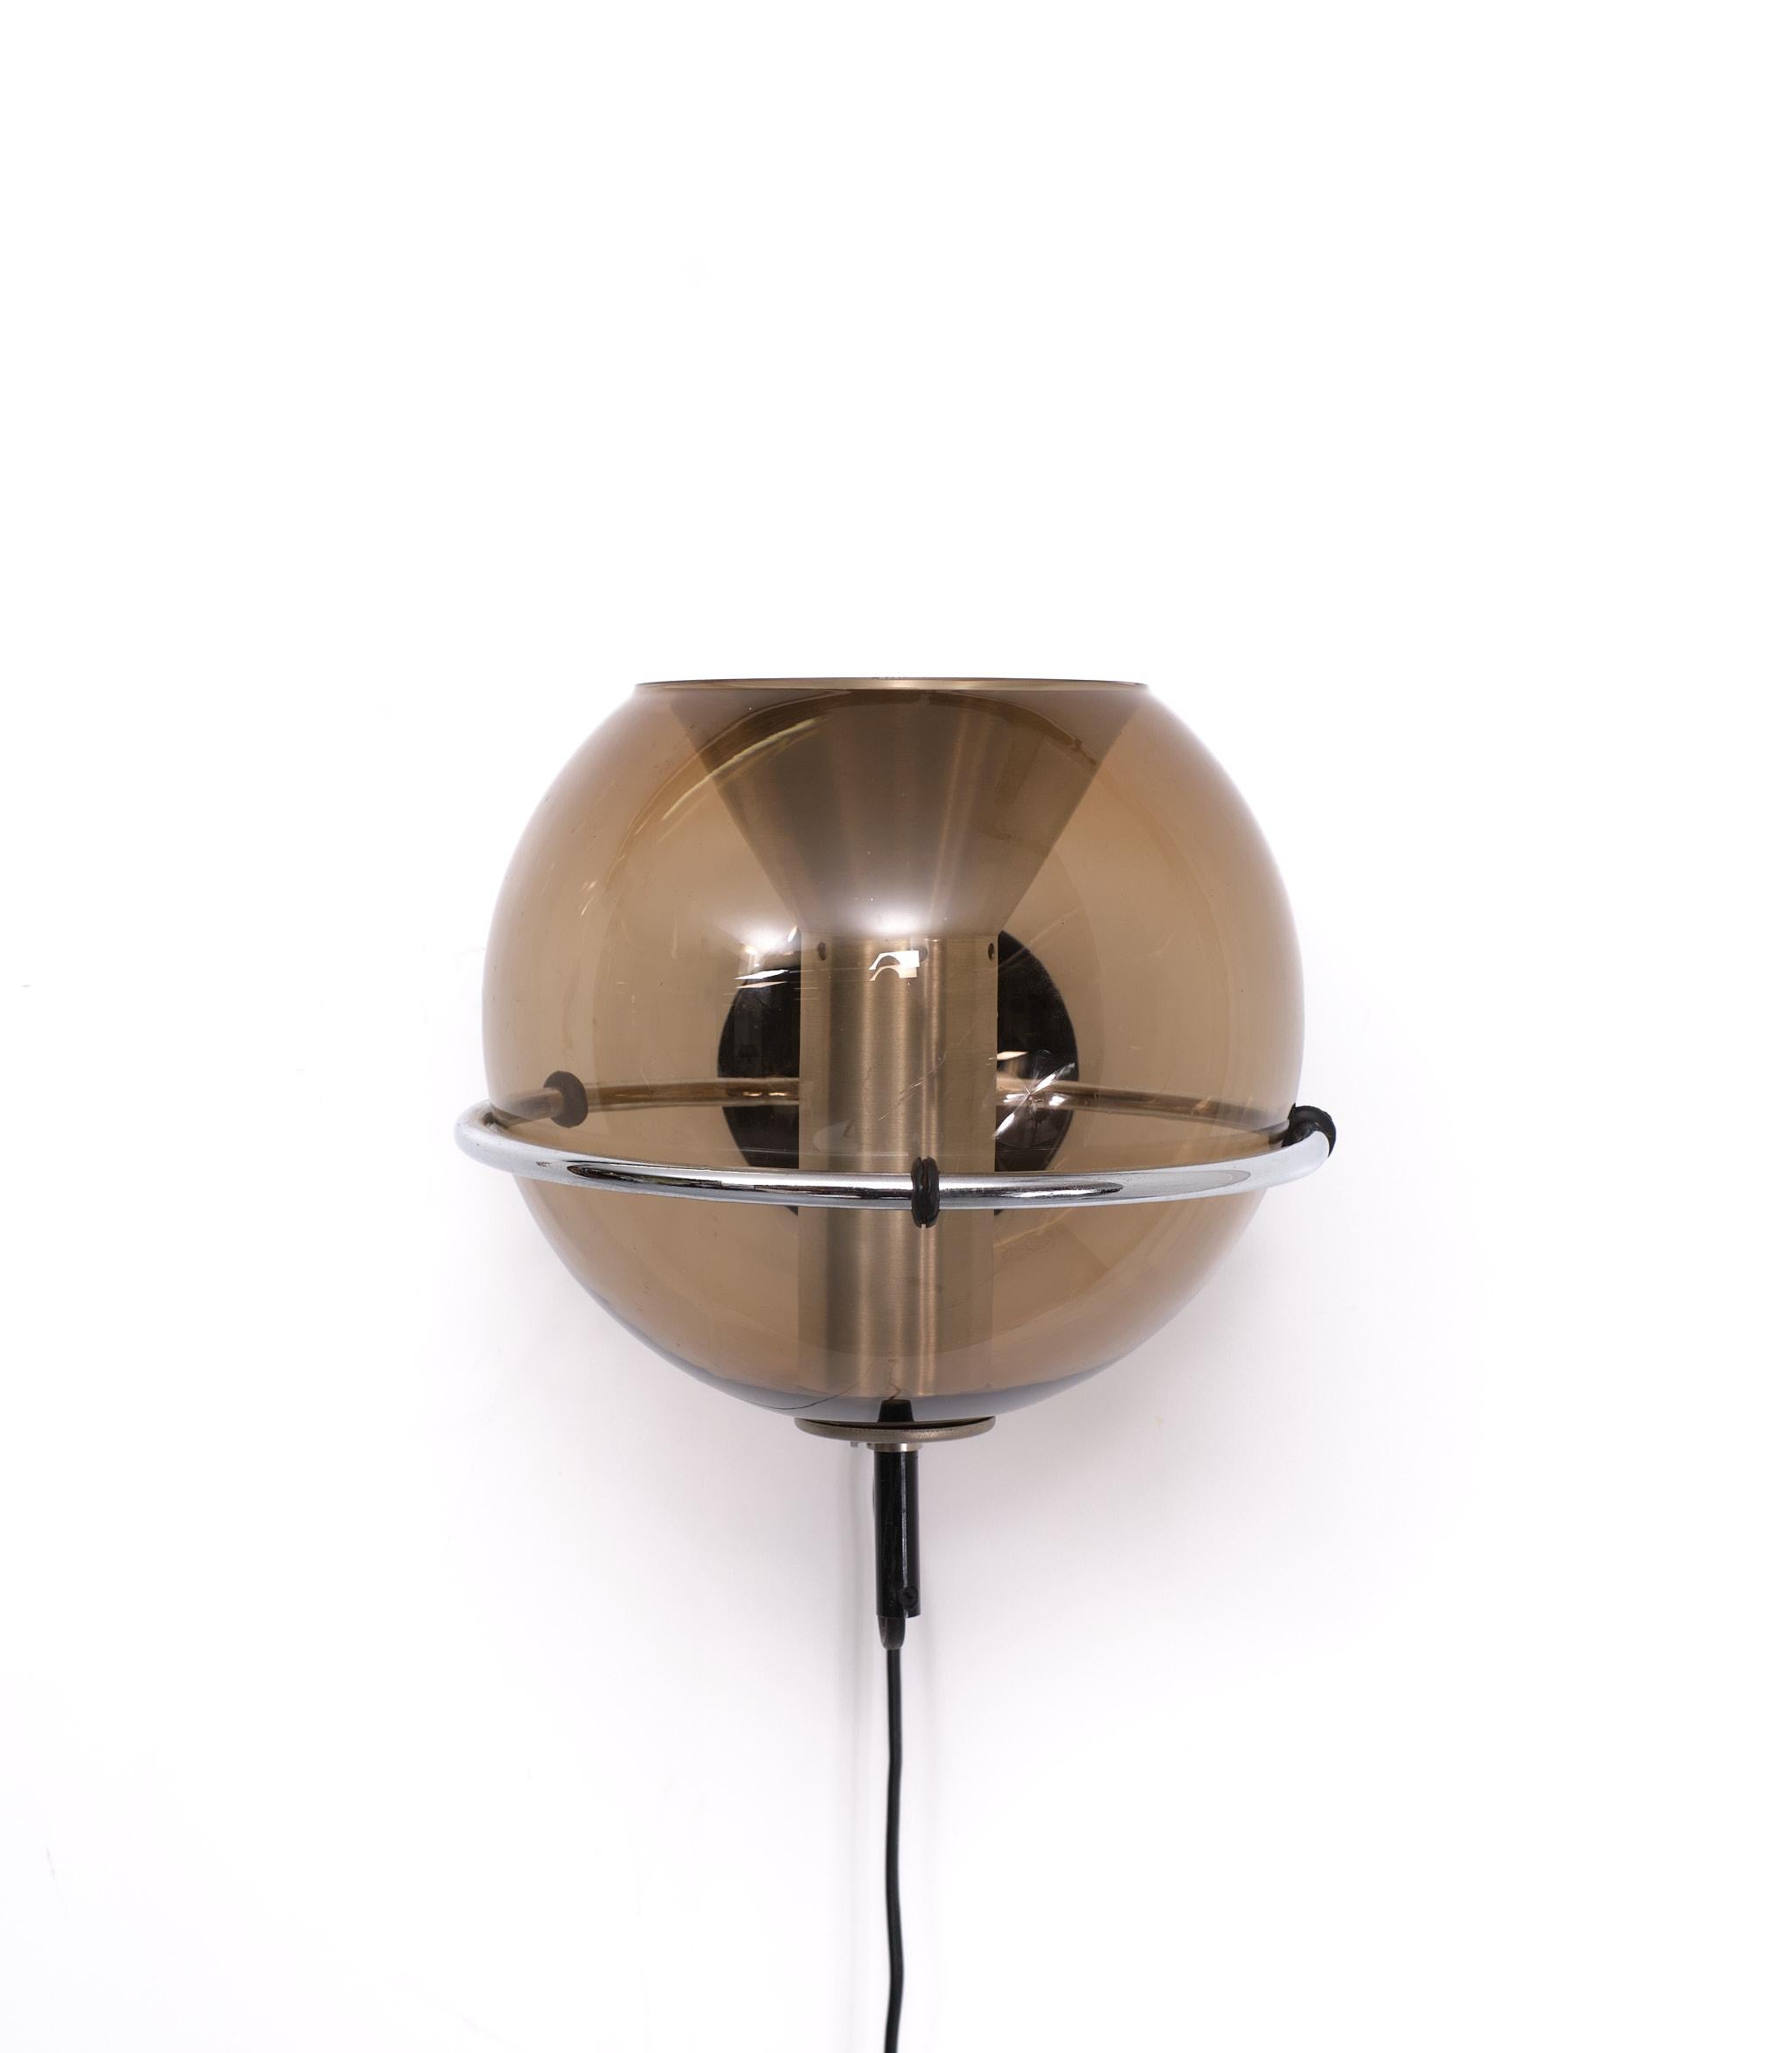 Manufactured by Raak Amsterdam Design Frank Ligtelijn . 1975  This wall lamp has a chrome wall ring that holds the smoked glass globe with aluminium diffuser shade on the inside. The wall plate is made of black painted aluminium. Lamp can shine up